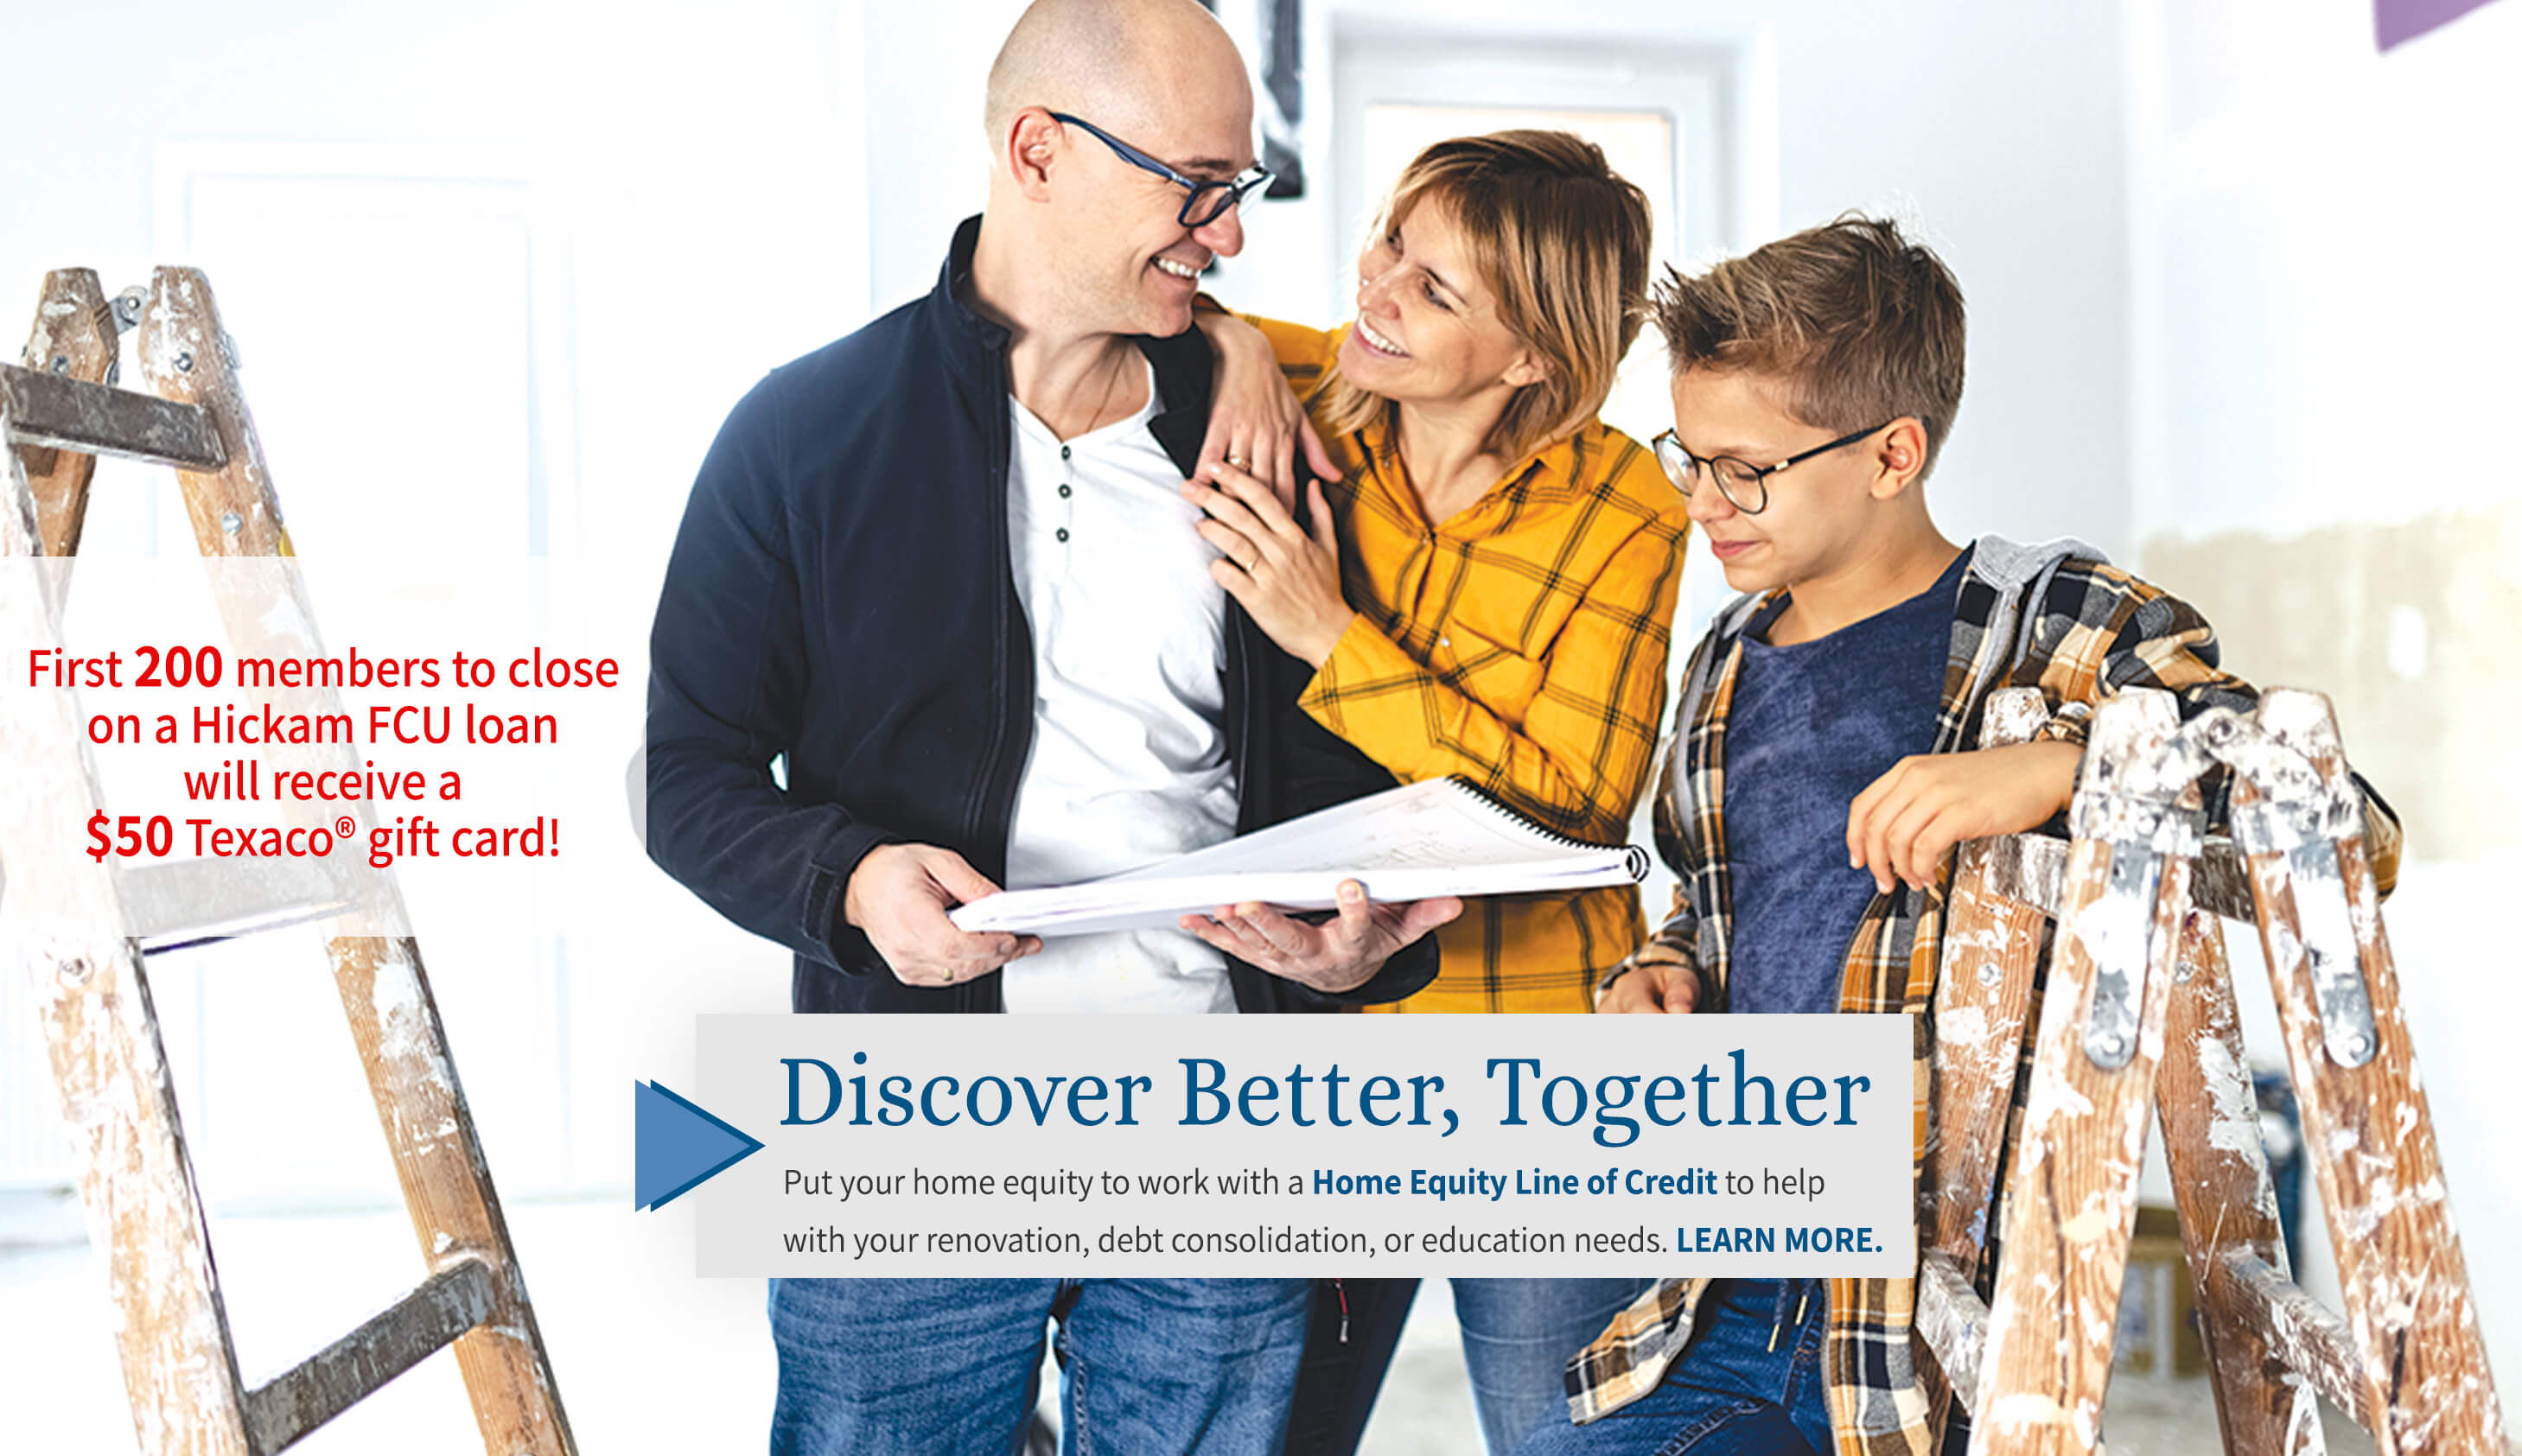 Home Equity Line of Credit. Special introductory rates. 1.99% apr for 36 month or 2.99% apr for 60 months. 4.21% current standard variable indexed rate thru 02/28/2023.